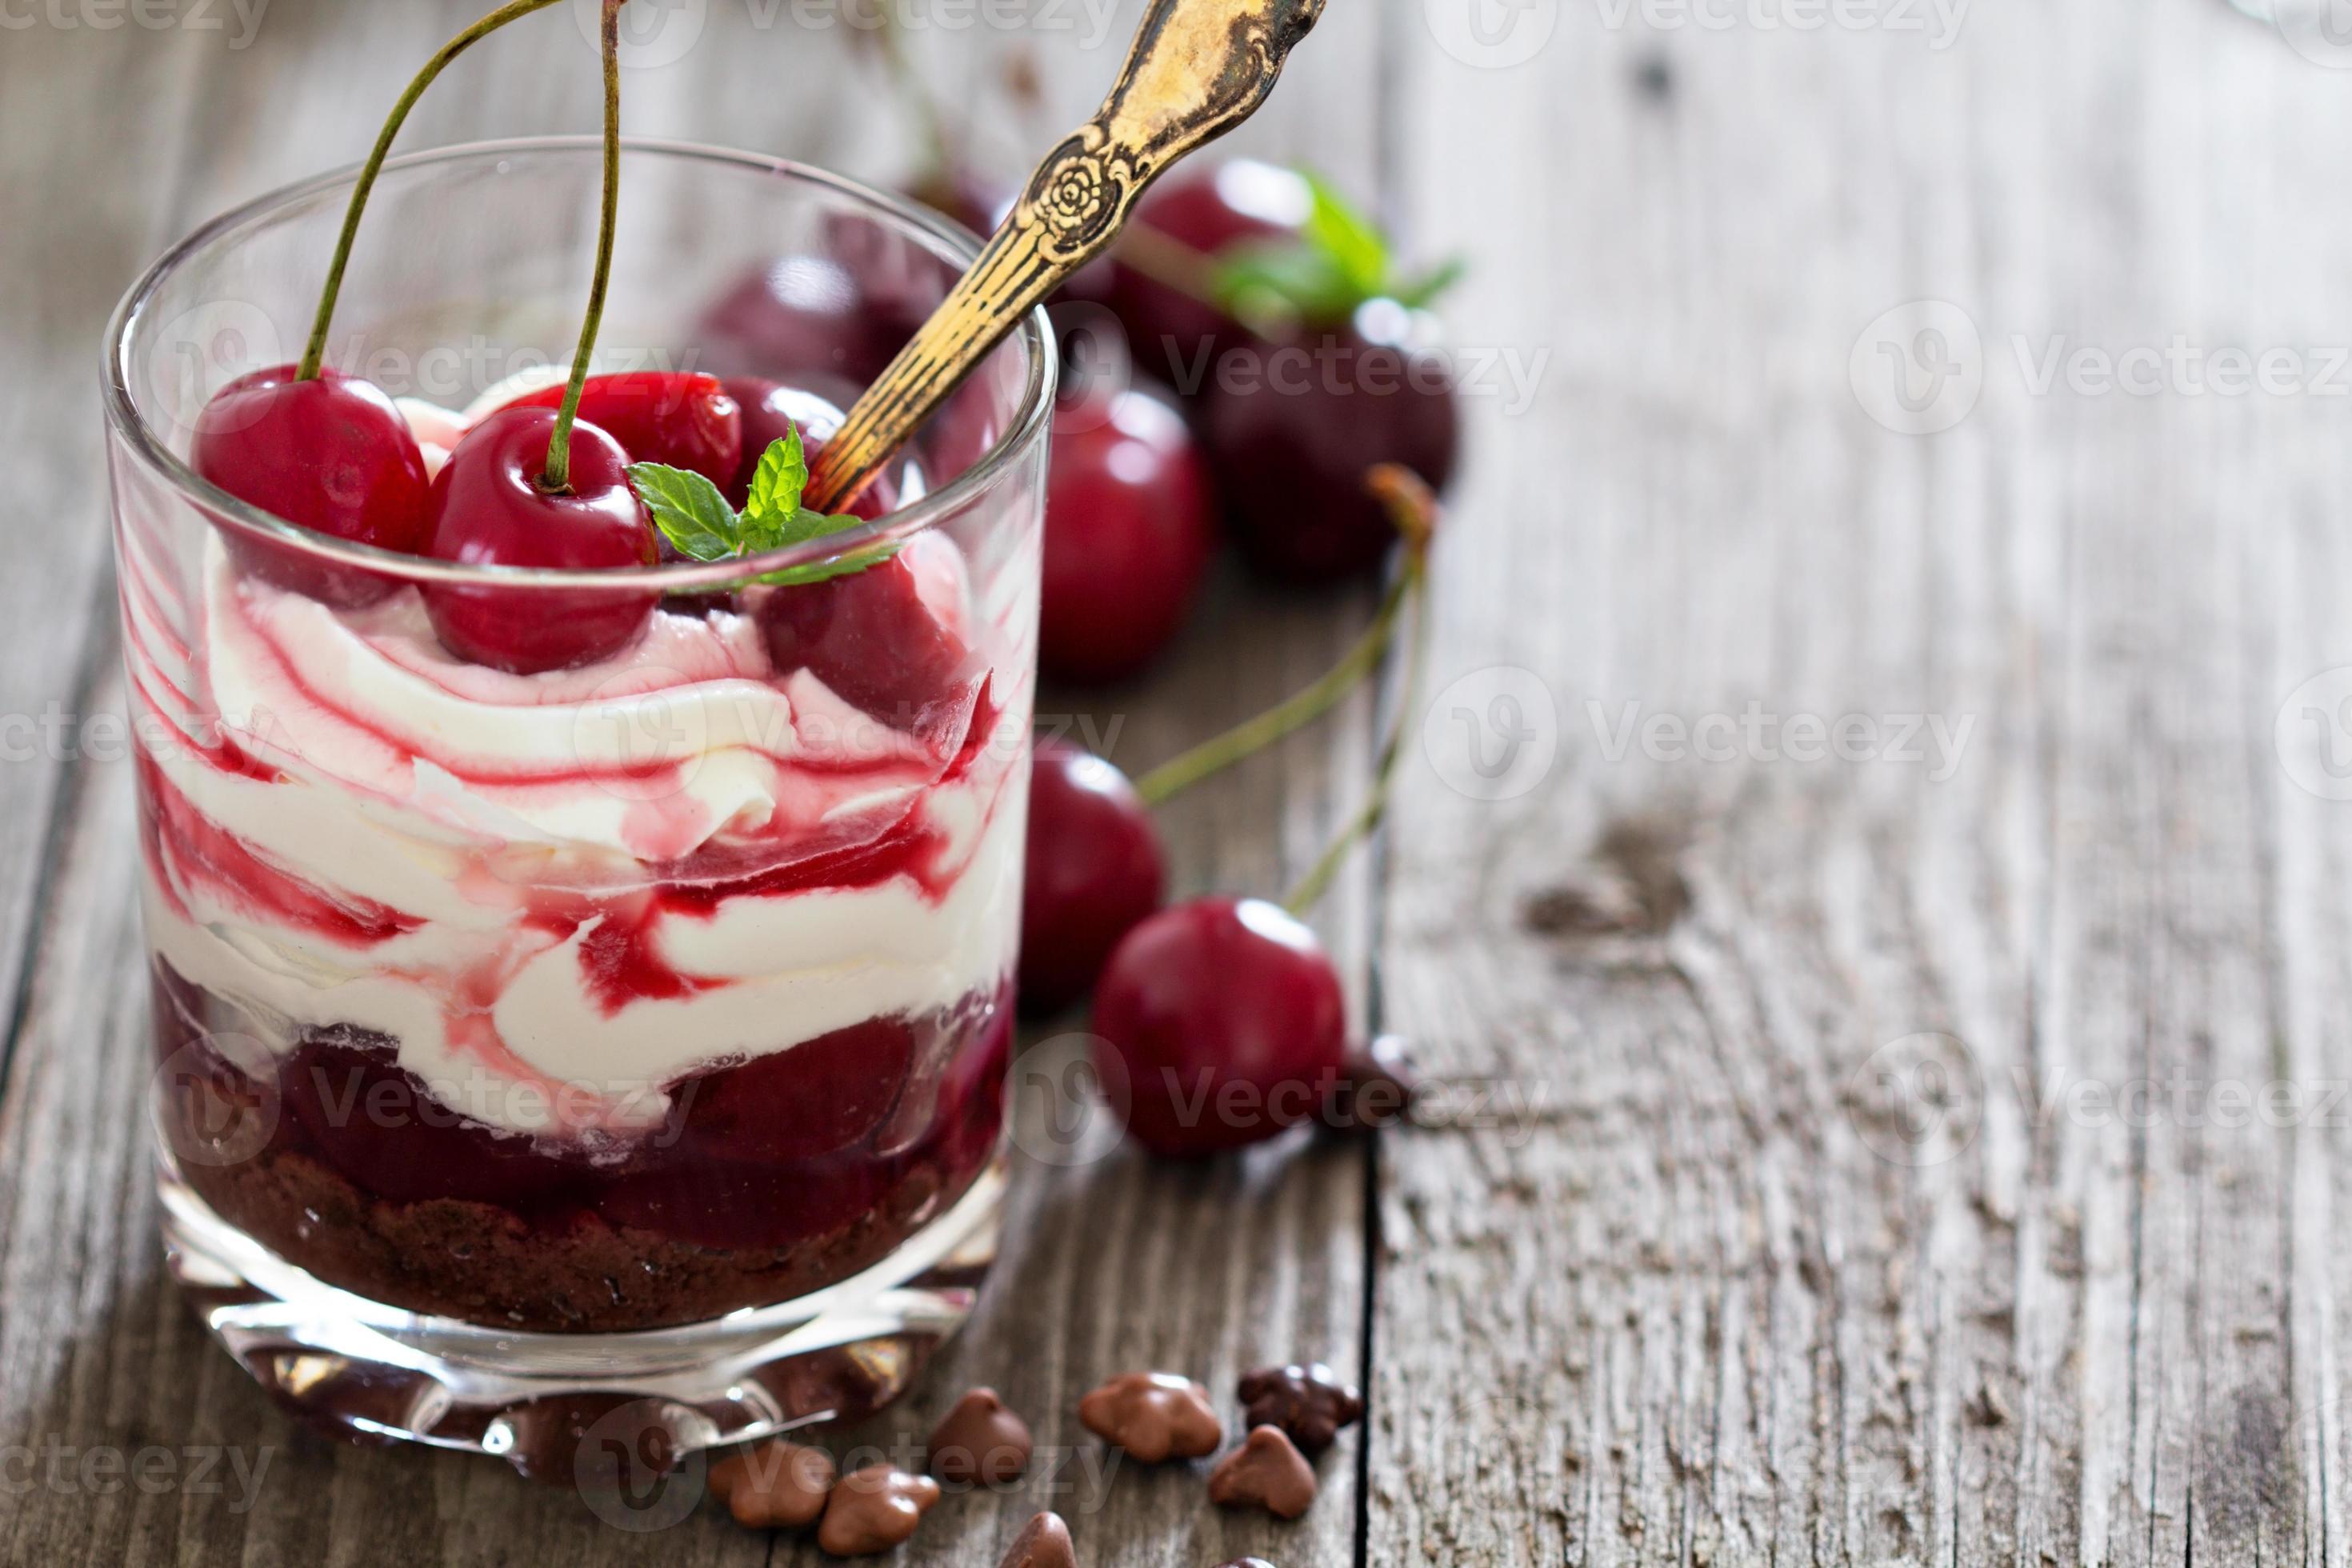 Sweet cherry cheesecake in a glass photo